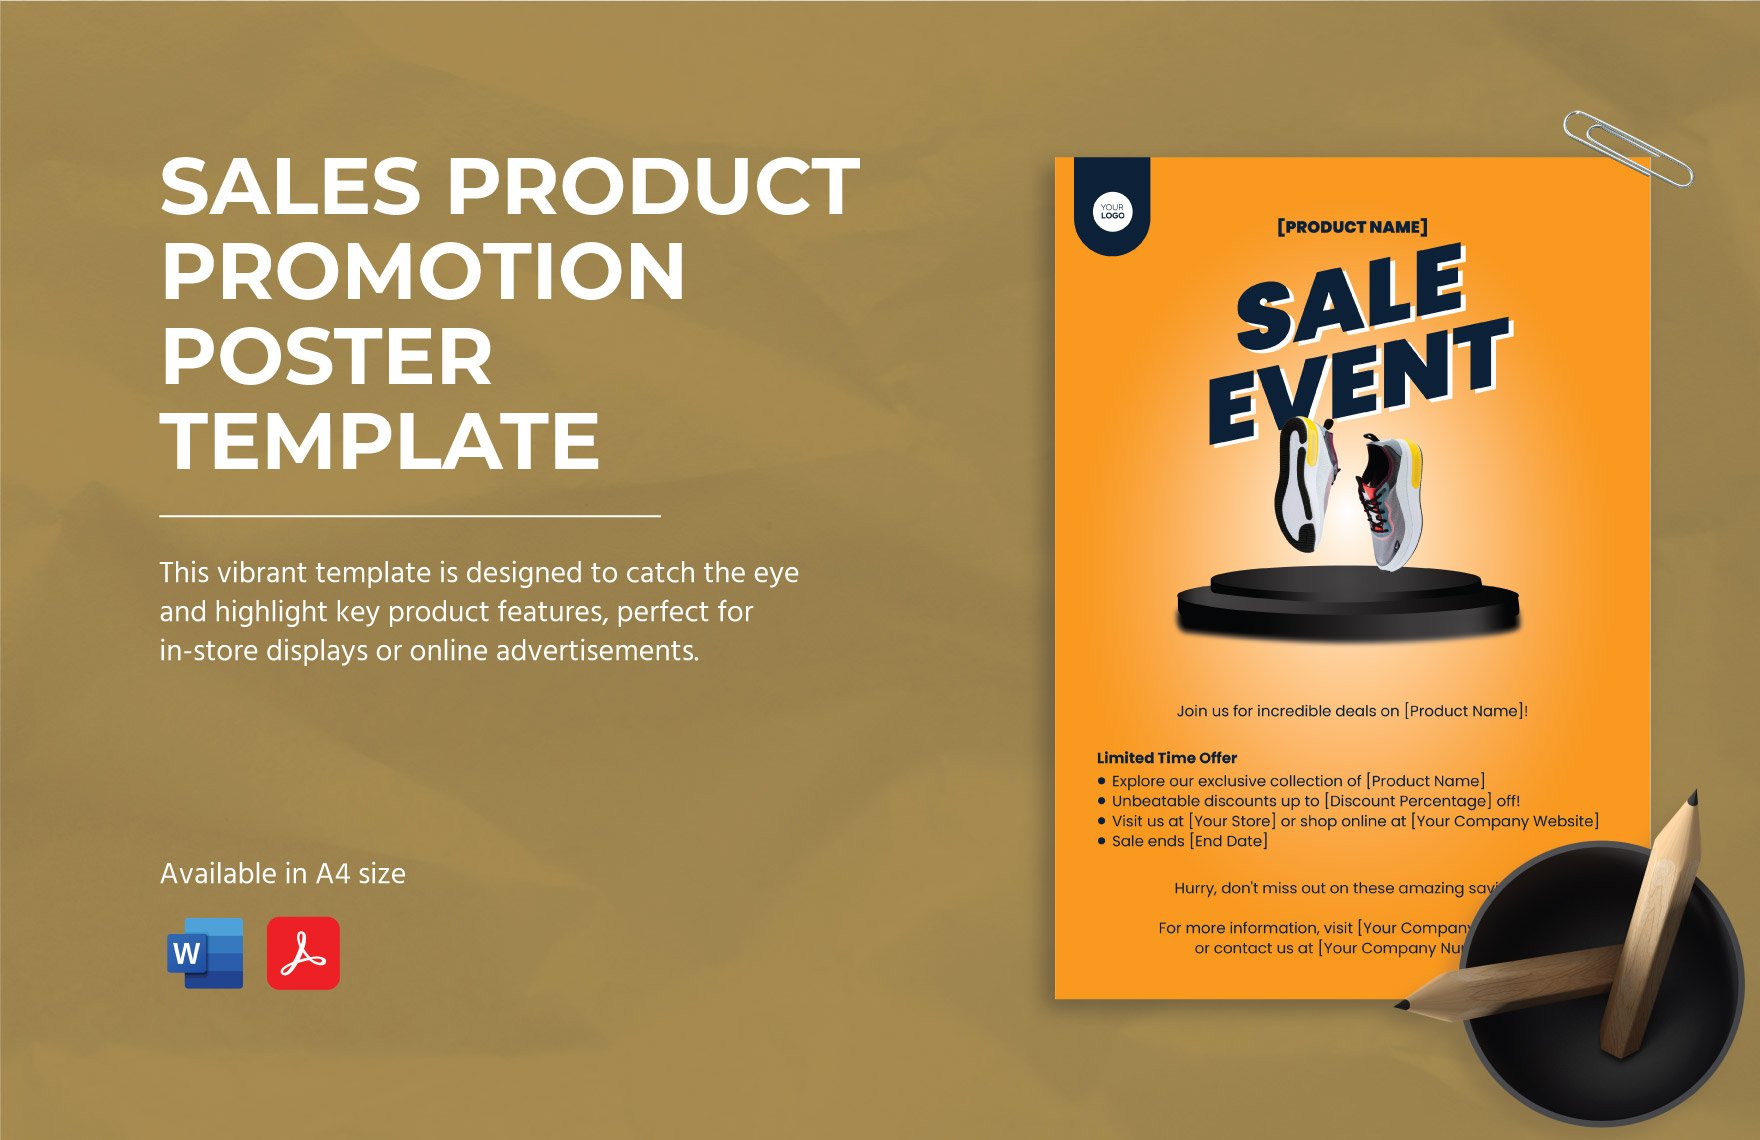 Sales Product Promotion Poster Template